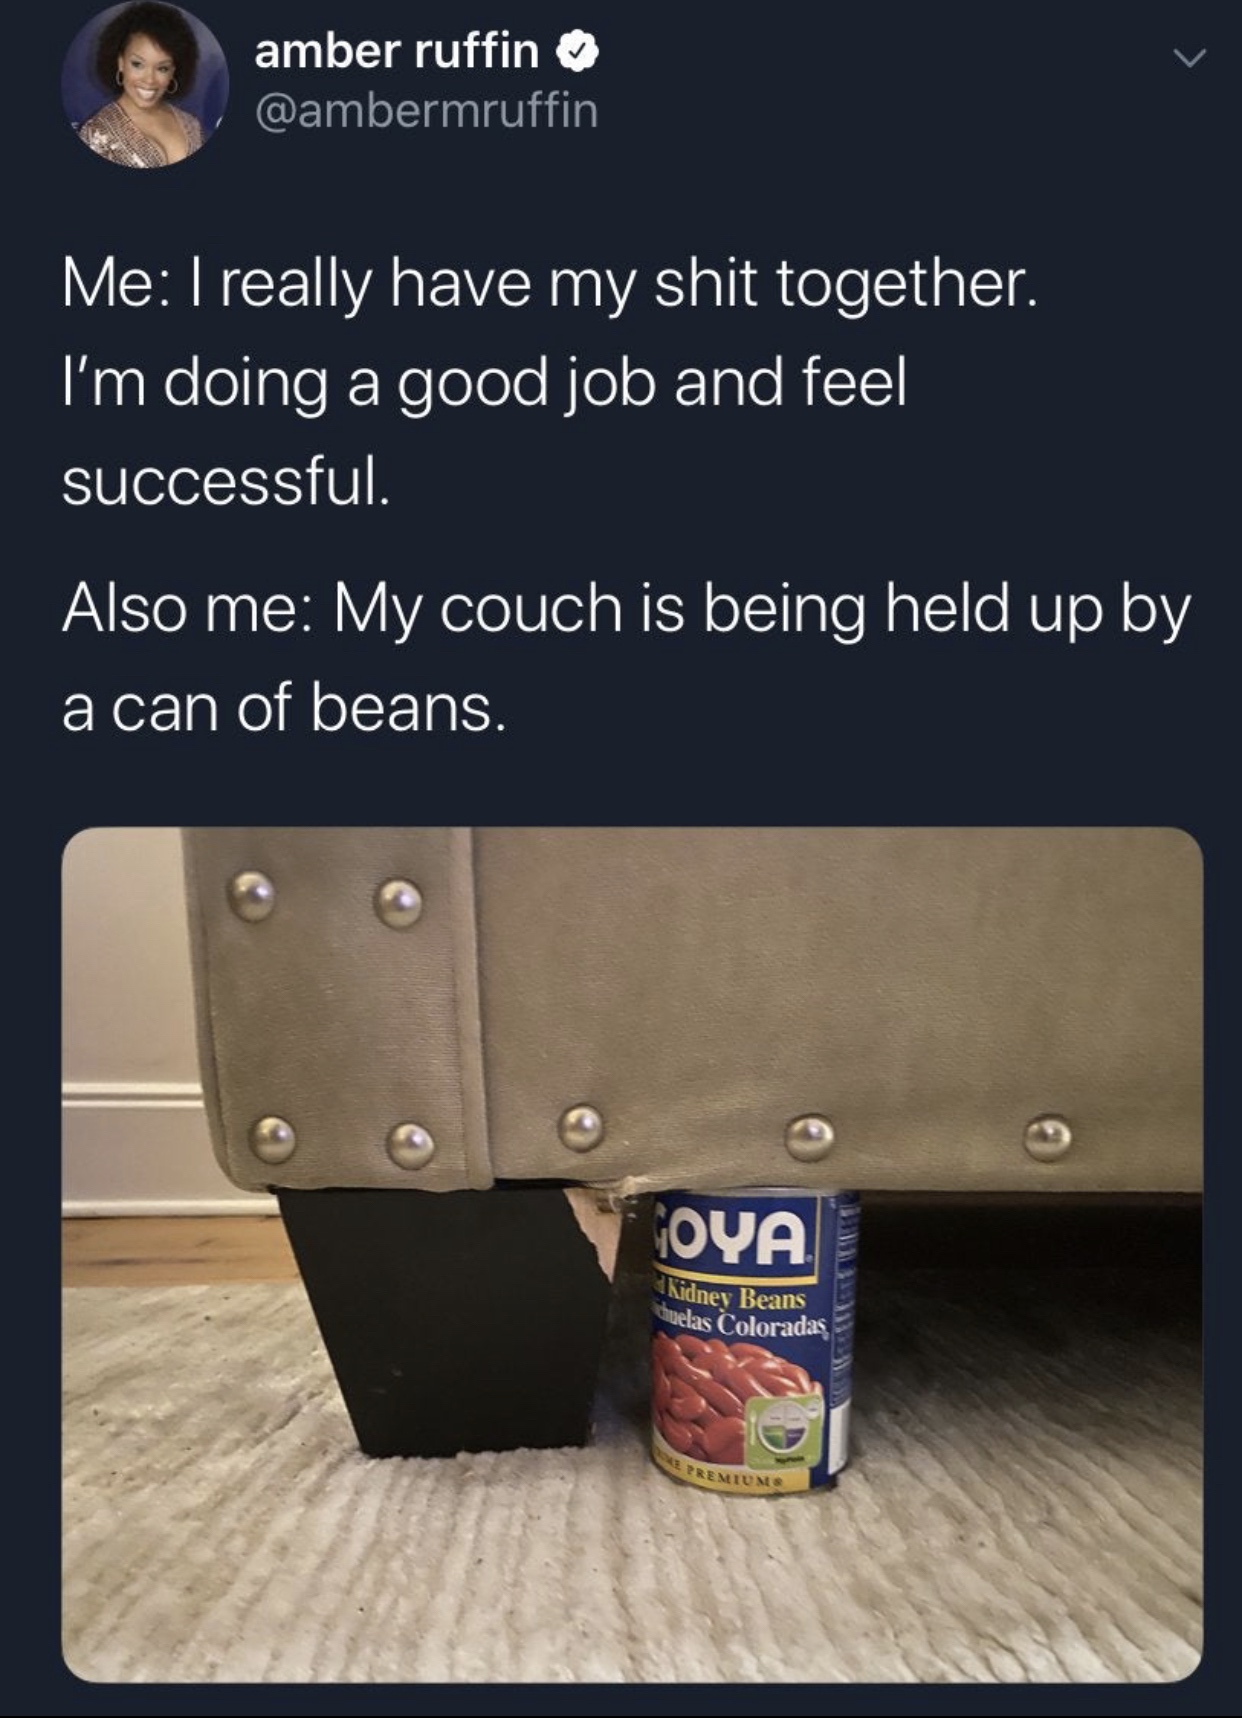 amber ruffin Me I really have my shit together. I'm doing a good job and feel successful. Also me My couch is being held up by a can of beans. Oya Kidney Beans huelas Coloradas Premium